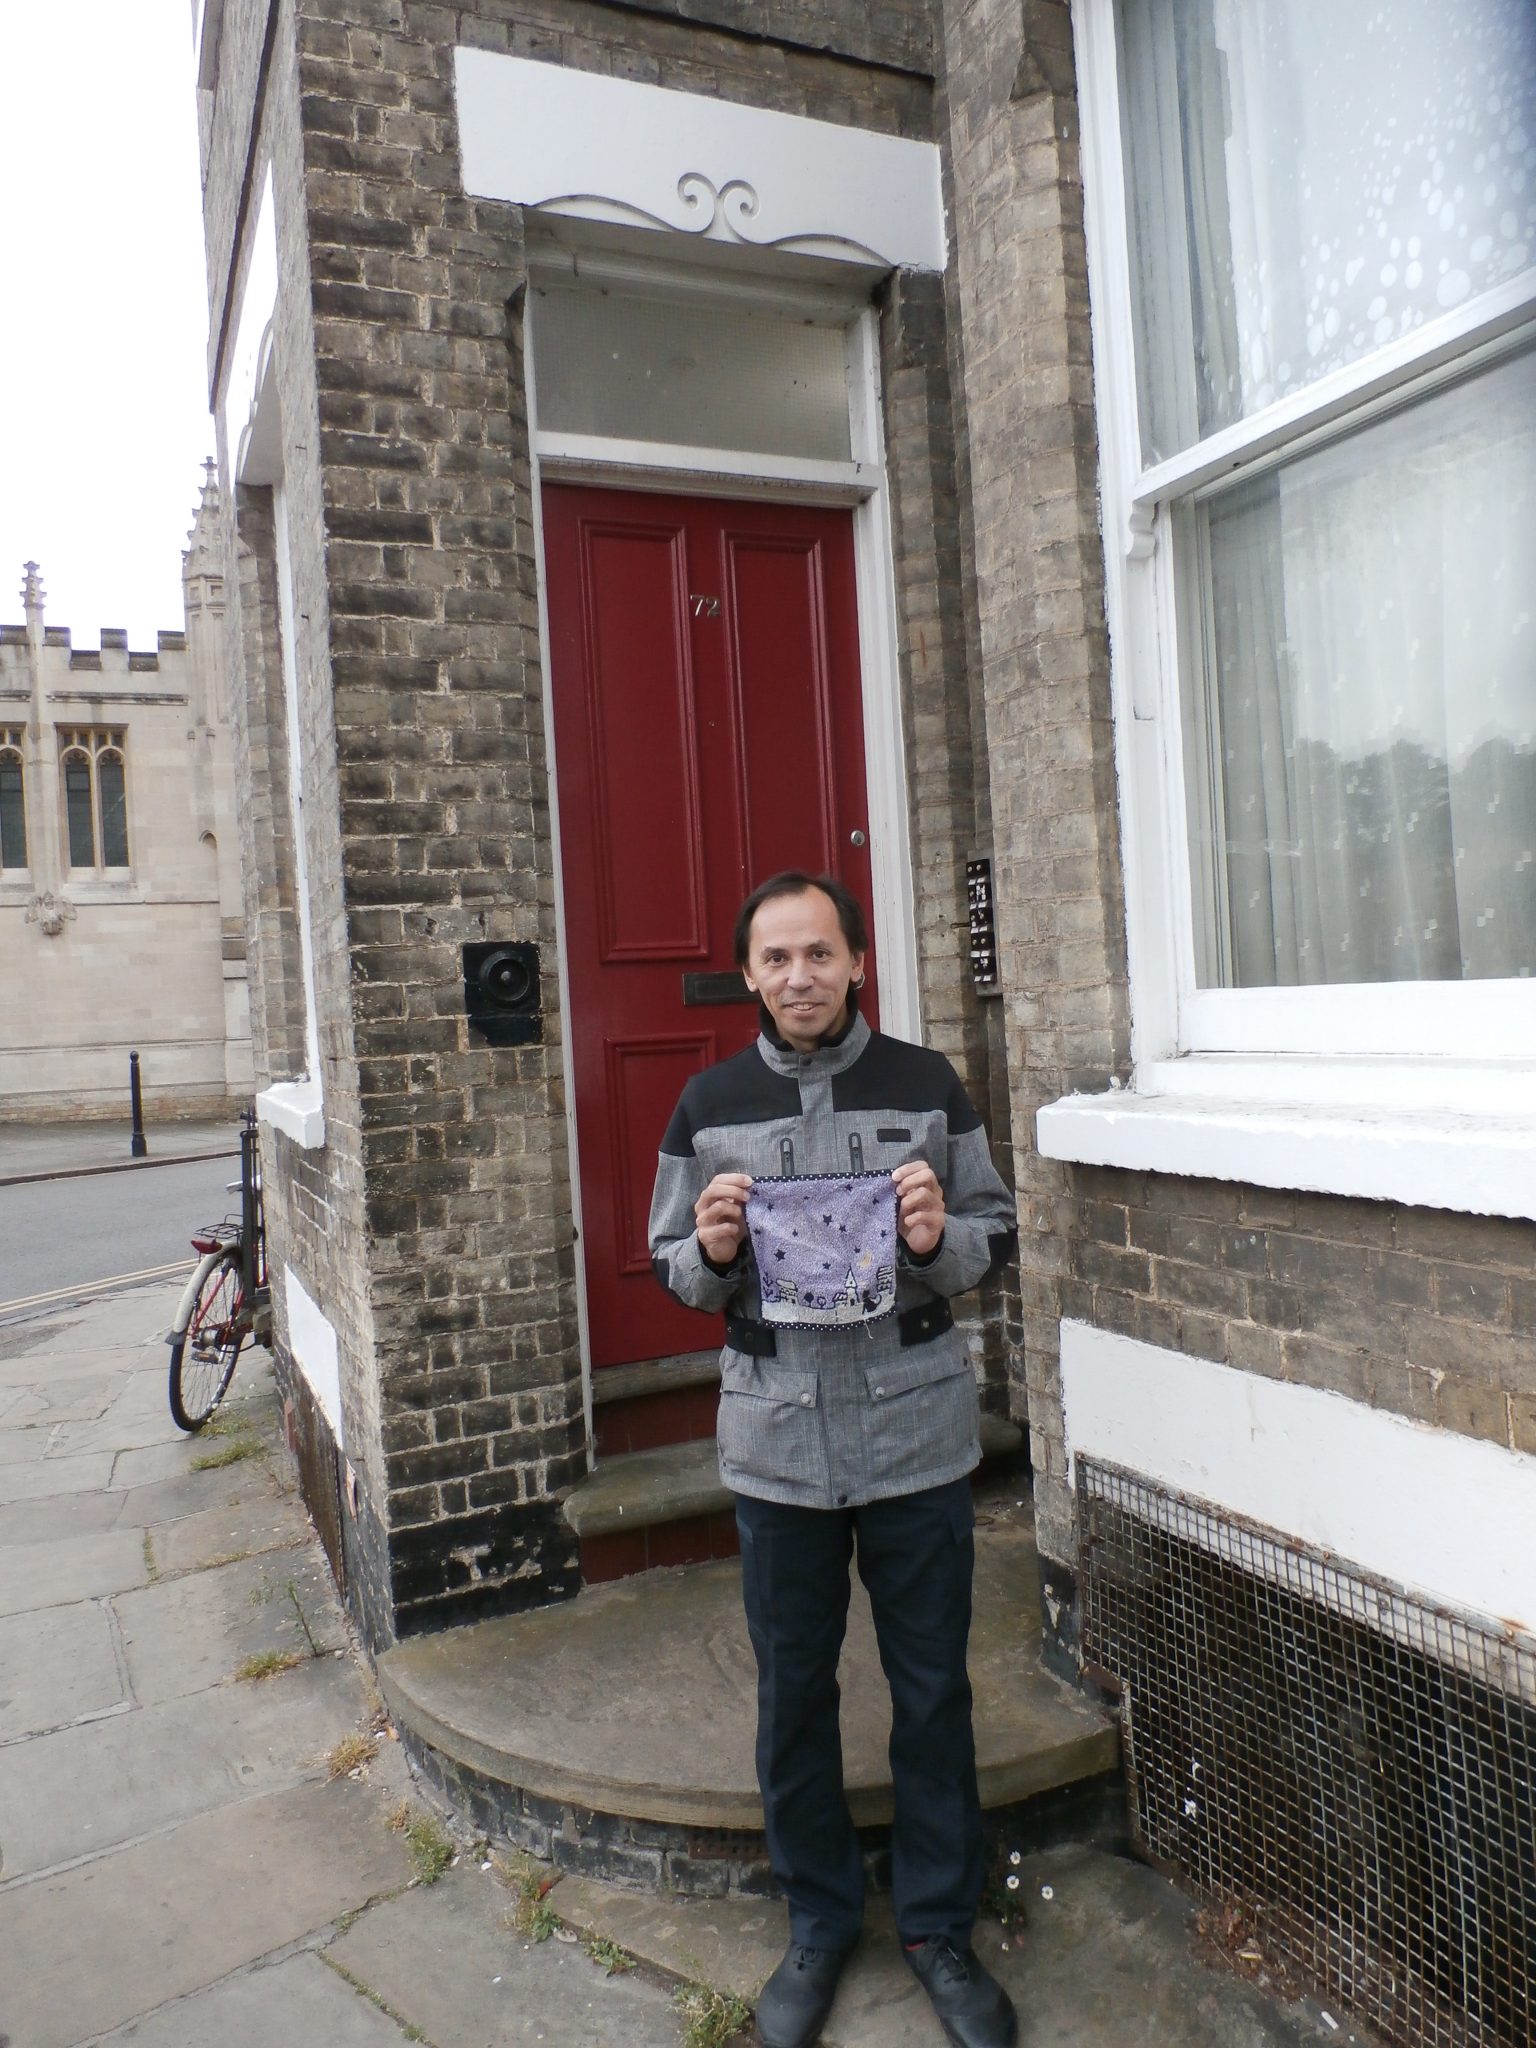 Christopher with his Japanese hand towel outside 72 Jesus Lane where Douglas Adams lived his first years